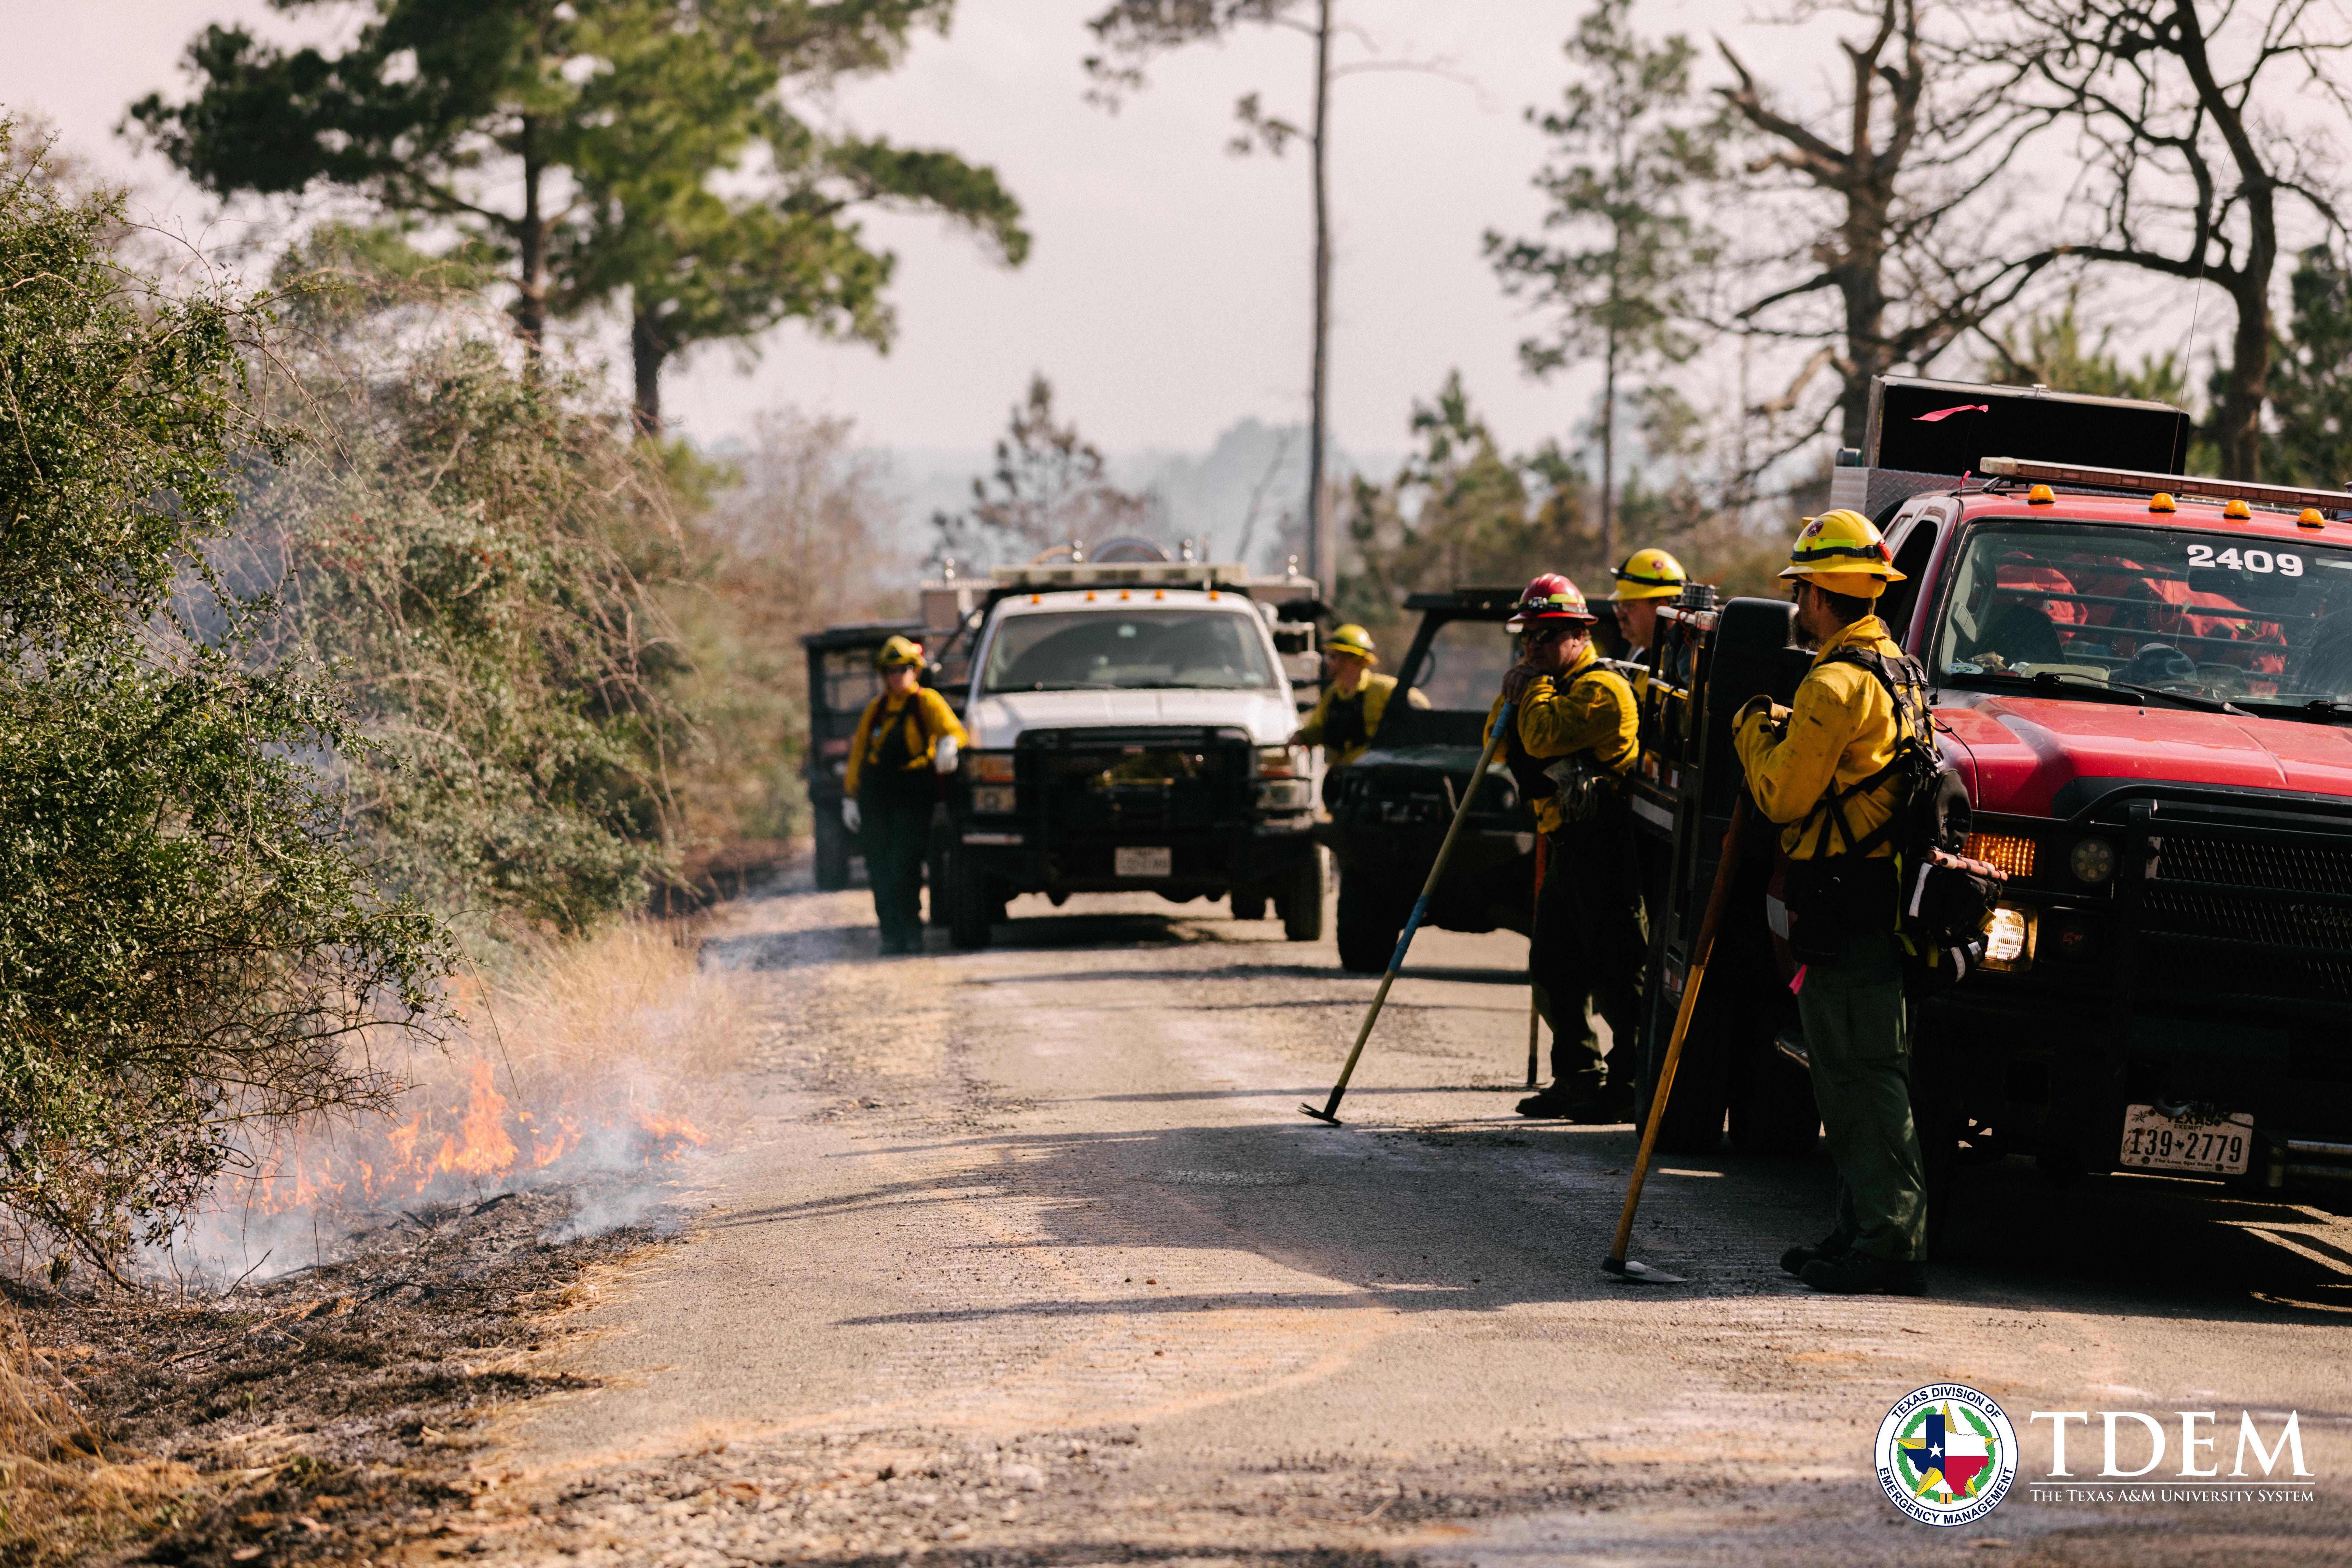 Picture shows members of a fireline crew watching a ground fire creep away from a roadway. They are standing in front of wildland fire engines.